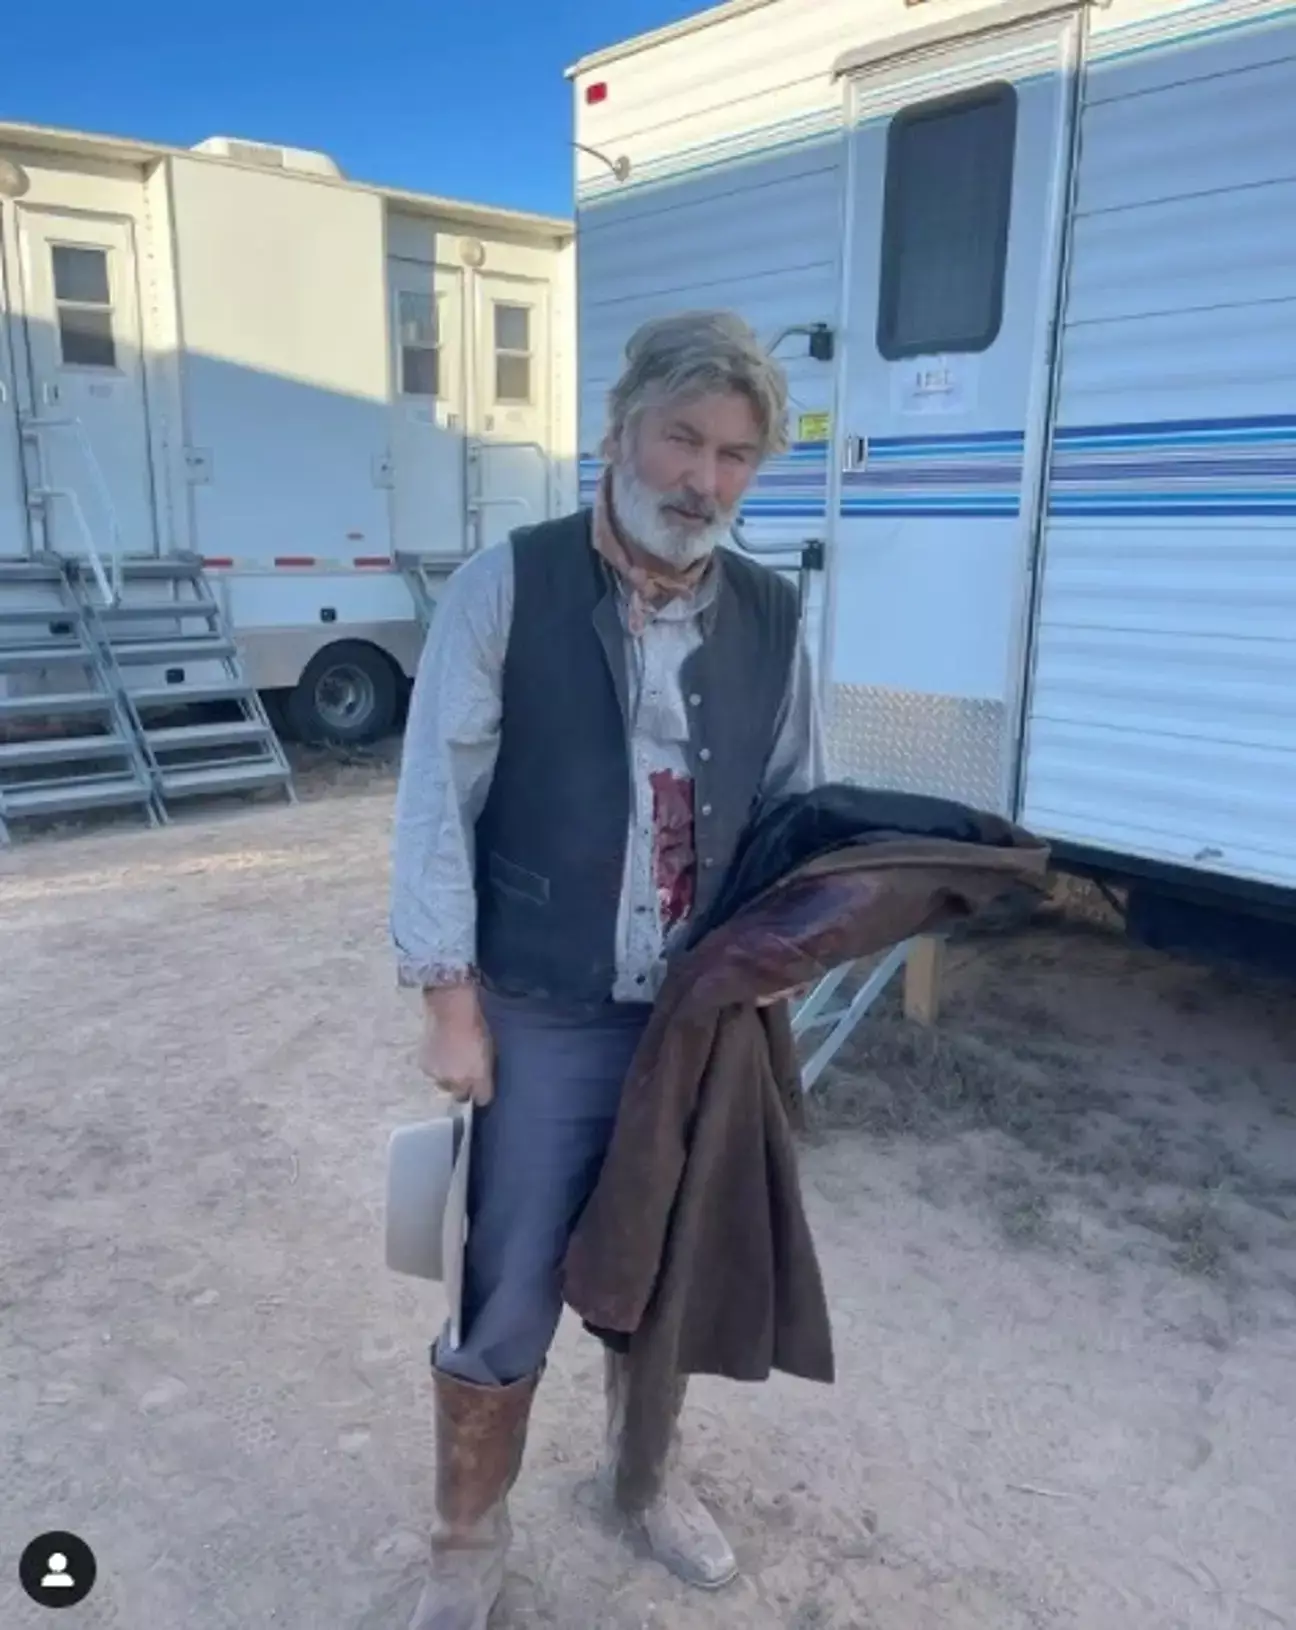 Baldwin seen in costume for his role in Rust in a now-deleted Instagram post.